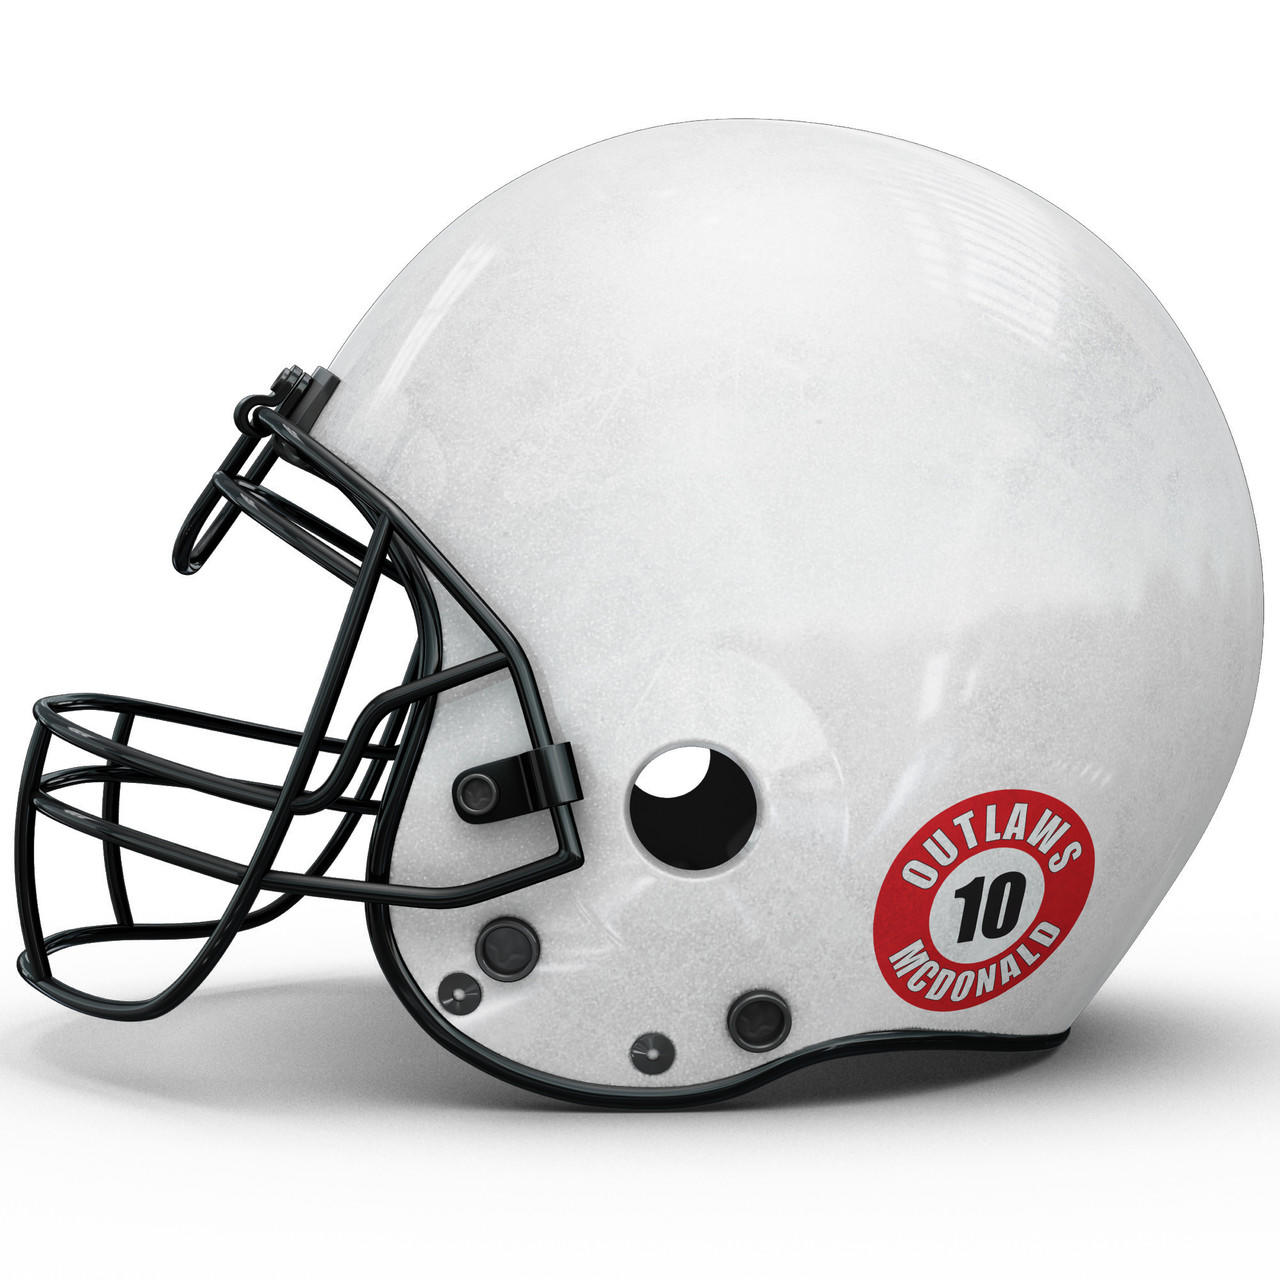 Personalized Football Sticker Set Questions & Answers